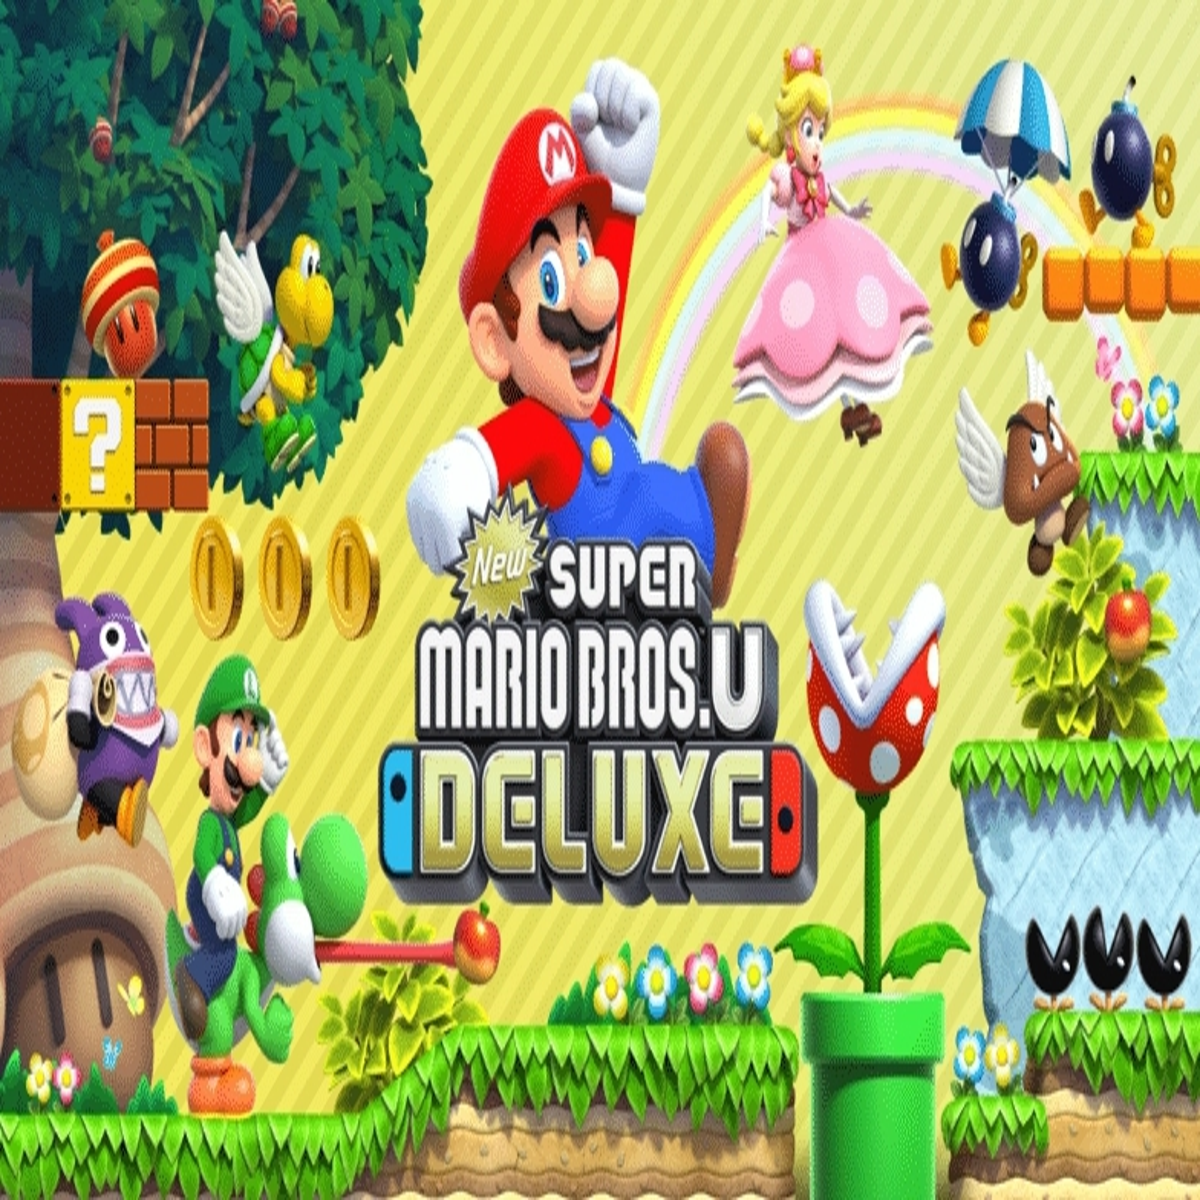 Arcade Archives Mario Bros. is now out on the eShop! : r